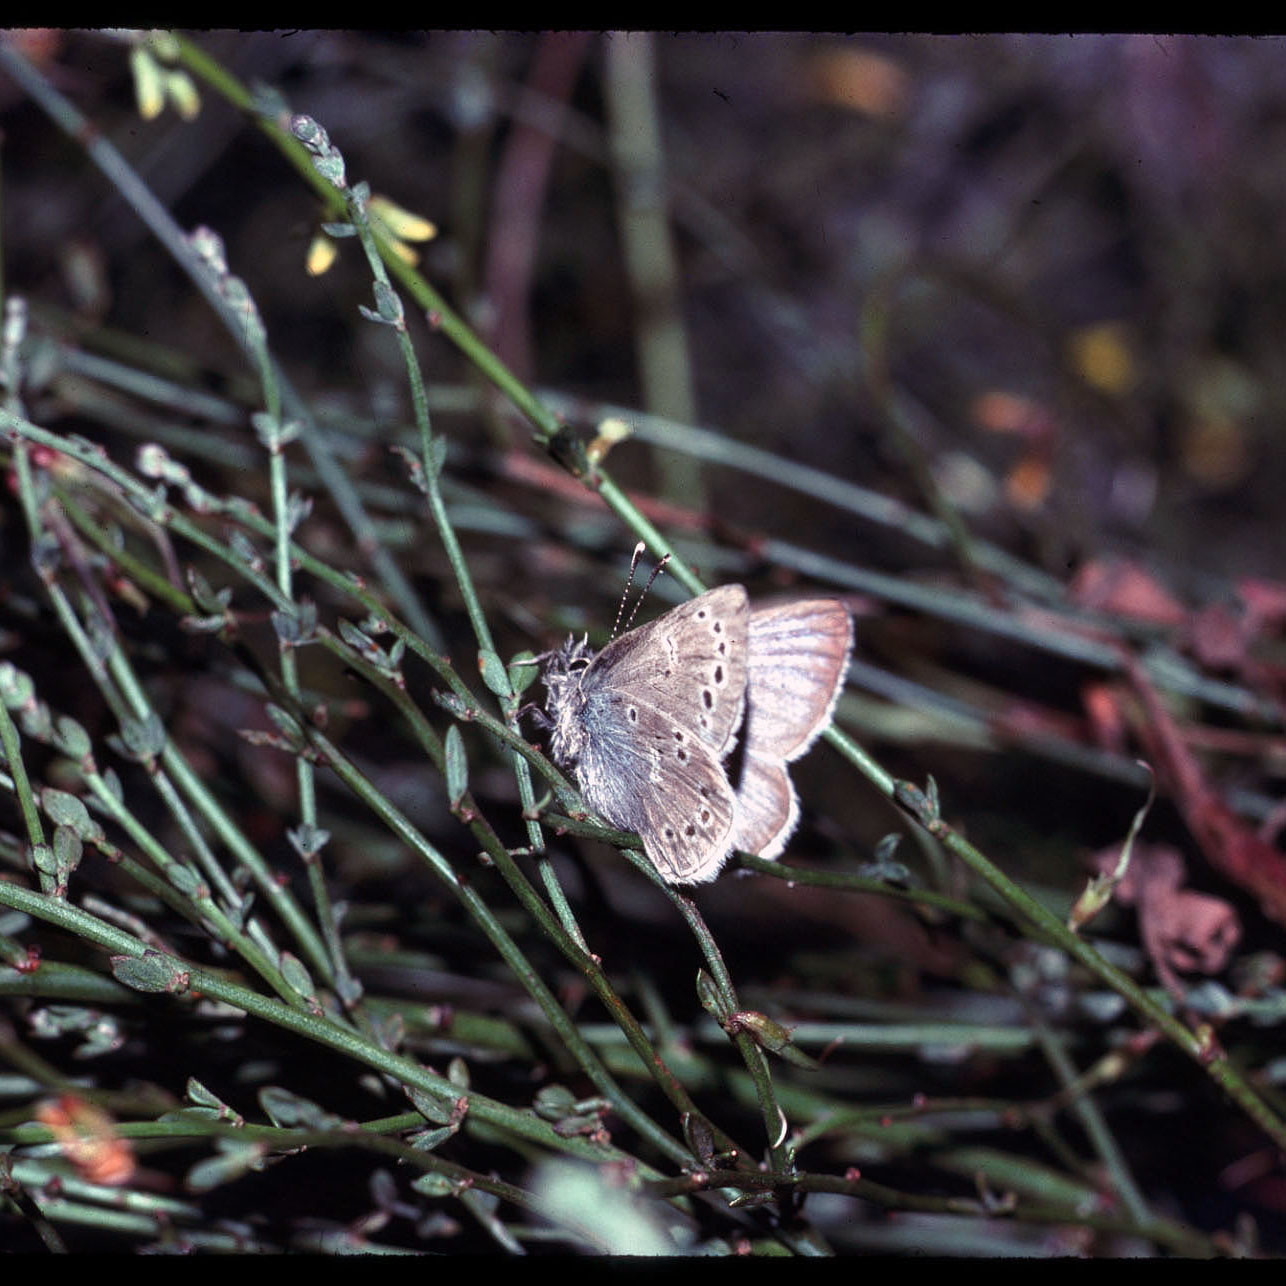 A stiff, preserved butterfly was placed on deerweed in this old, slightly distorted photo.